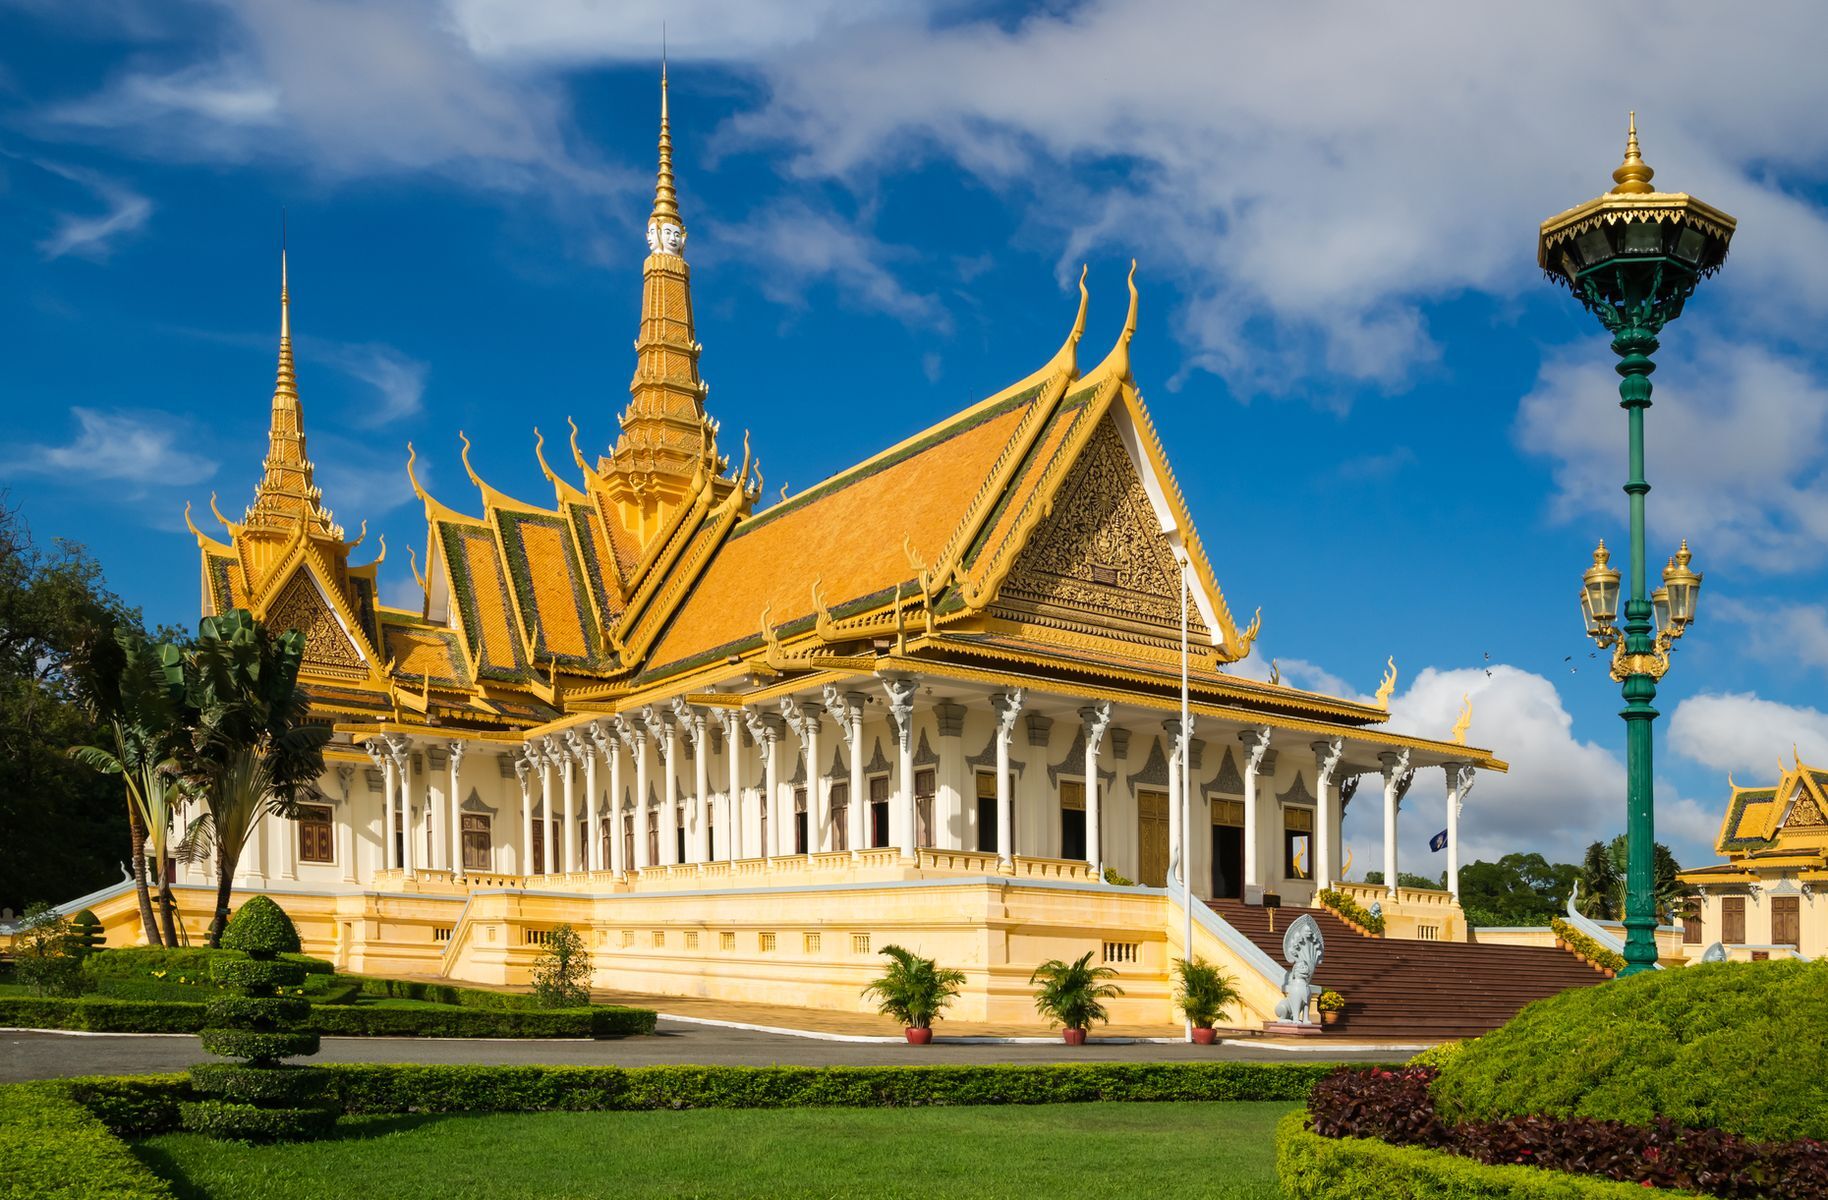 <p>Flights to Cambodia are generally economical, making it a <a href="https://kampatour.com/how-to-get-to-cambodia" rel="noreferrer noopener">budget-friendly destination</a>, especially during the off-season. Once part of the French colonial empire, Cambodia visibly retains this heritage in much of the architecture seen in its capital, Phnom Penh. In contrast, the <a href="https://www.lonelyplanet.com/cambodia/phnom-penh/attractions/royal-palace/a/poi-sig/1381202/355881" rel="noreferrer noopener">Royal Palace</a>, a building complex constructed over several decades starting in the 1860s, is emblematic of Khmer culture. The current king of Cambodia continues to reside there, and visitors are welcome to enter when the sovereign is absent, for the modest sum of 40,000 riels (<a href="https://exchangerate.guru/khr/usd/40000/" rel="noreferrer noopener">US$10</a>). Culture lovers can learn more about this civilization at the <a href="https://www.tour-cambodia.com/travel-guide/attraction/national-museum-cambodia" rel="noreferrer noopener">National Museum of Cambodia</a>, home to one of the largest collections of Khmer art. To immerse yourself even further into the national ambiance, stop by the <a href="https://www.facebook.com/elevenonekitchen/" rel="noreferrer noopener">Eleven</a> <a href="https://www.facebook.com/elevenonekitchen/" rel="noreferrer noopener">One</a> <a href="https://www.facebook.com/elevenonekitchen/" rel="noreferrer noopener">Kitchen</a> for a taste of savoury, authentic Cambodian cuisine at bargain prices.</p>